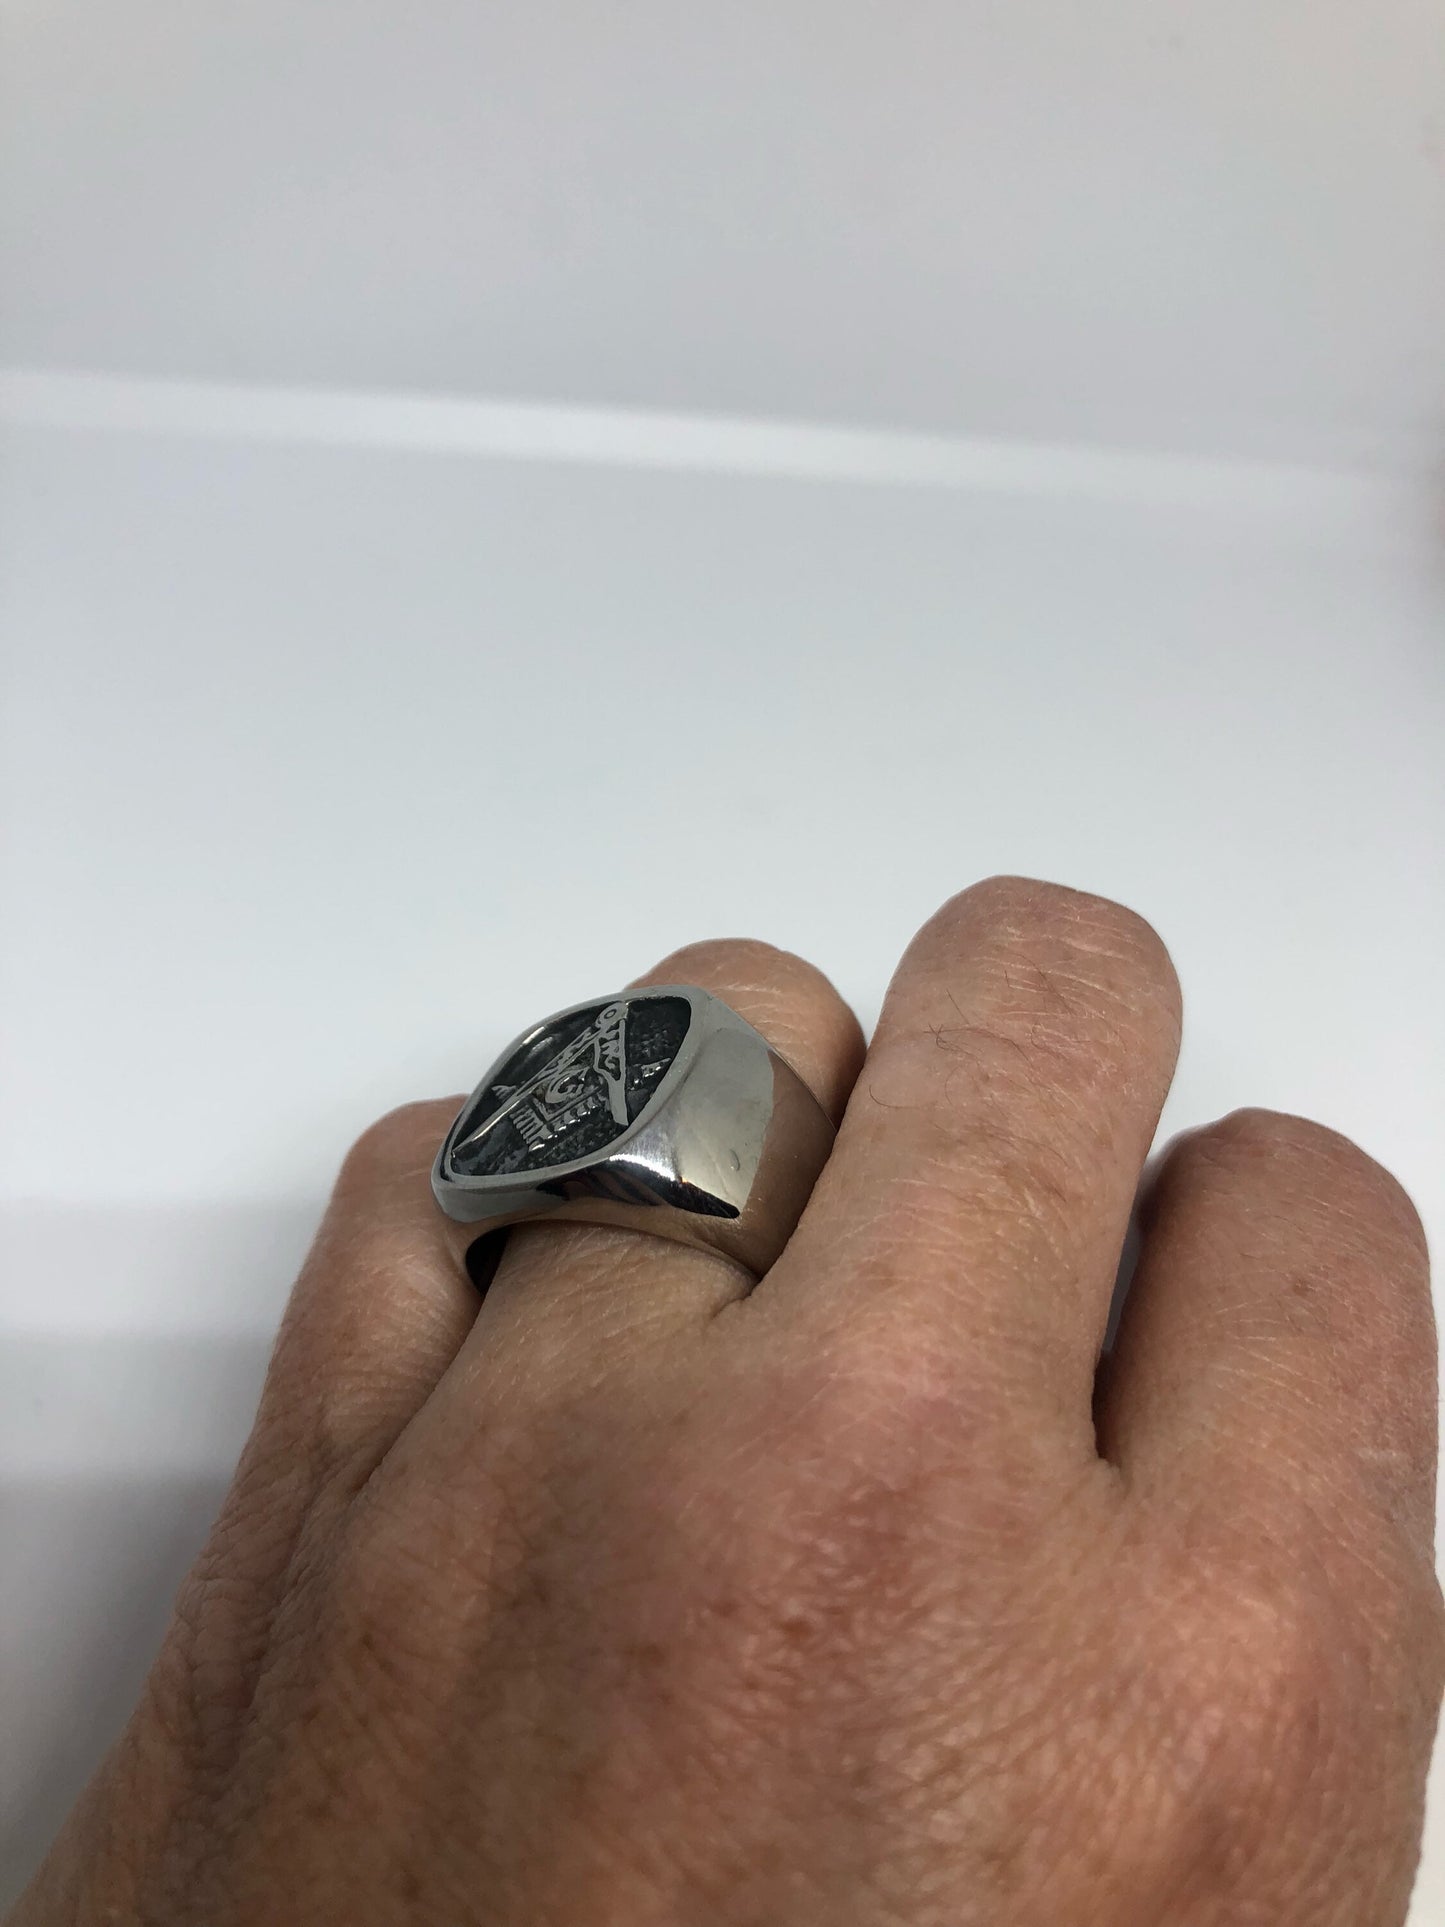 Vintage Gothic Stainless Steel Free Mason G Mens Ring